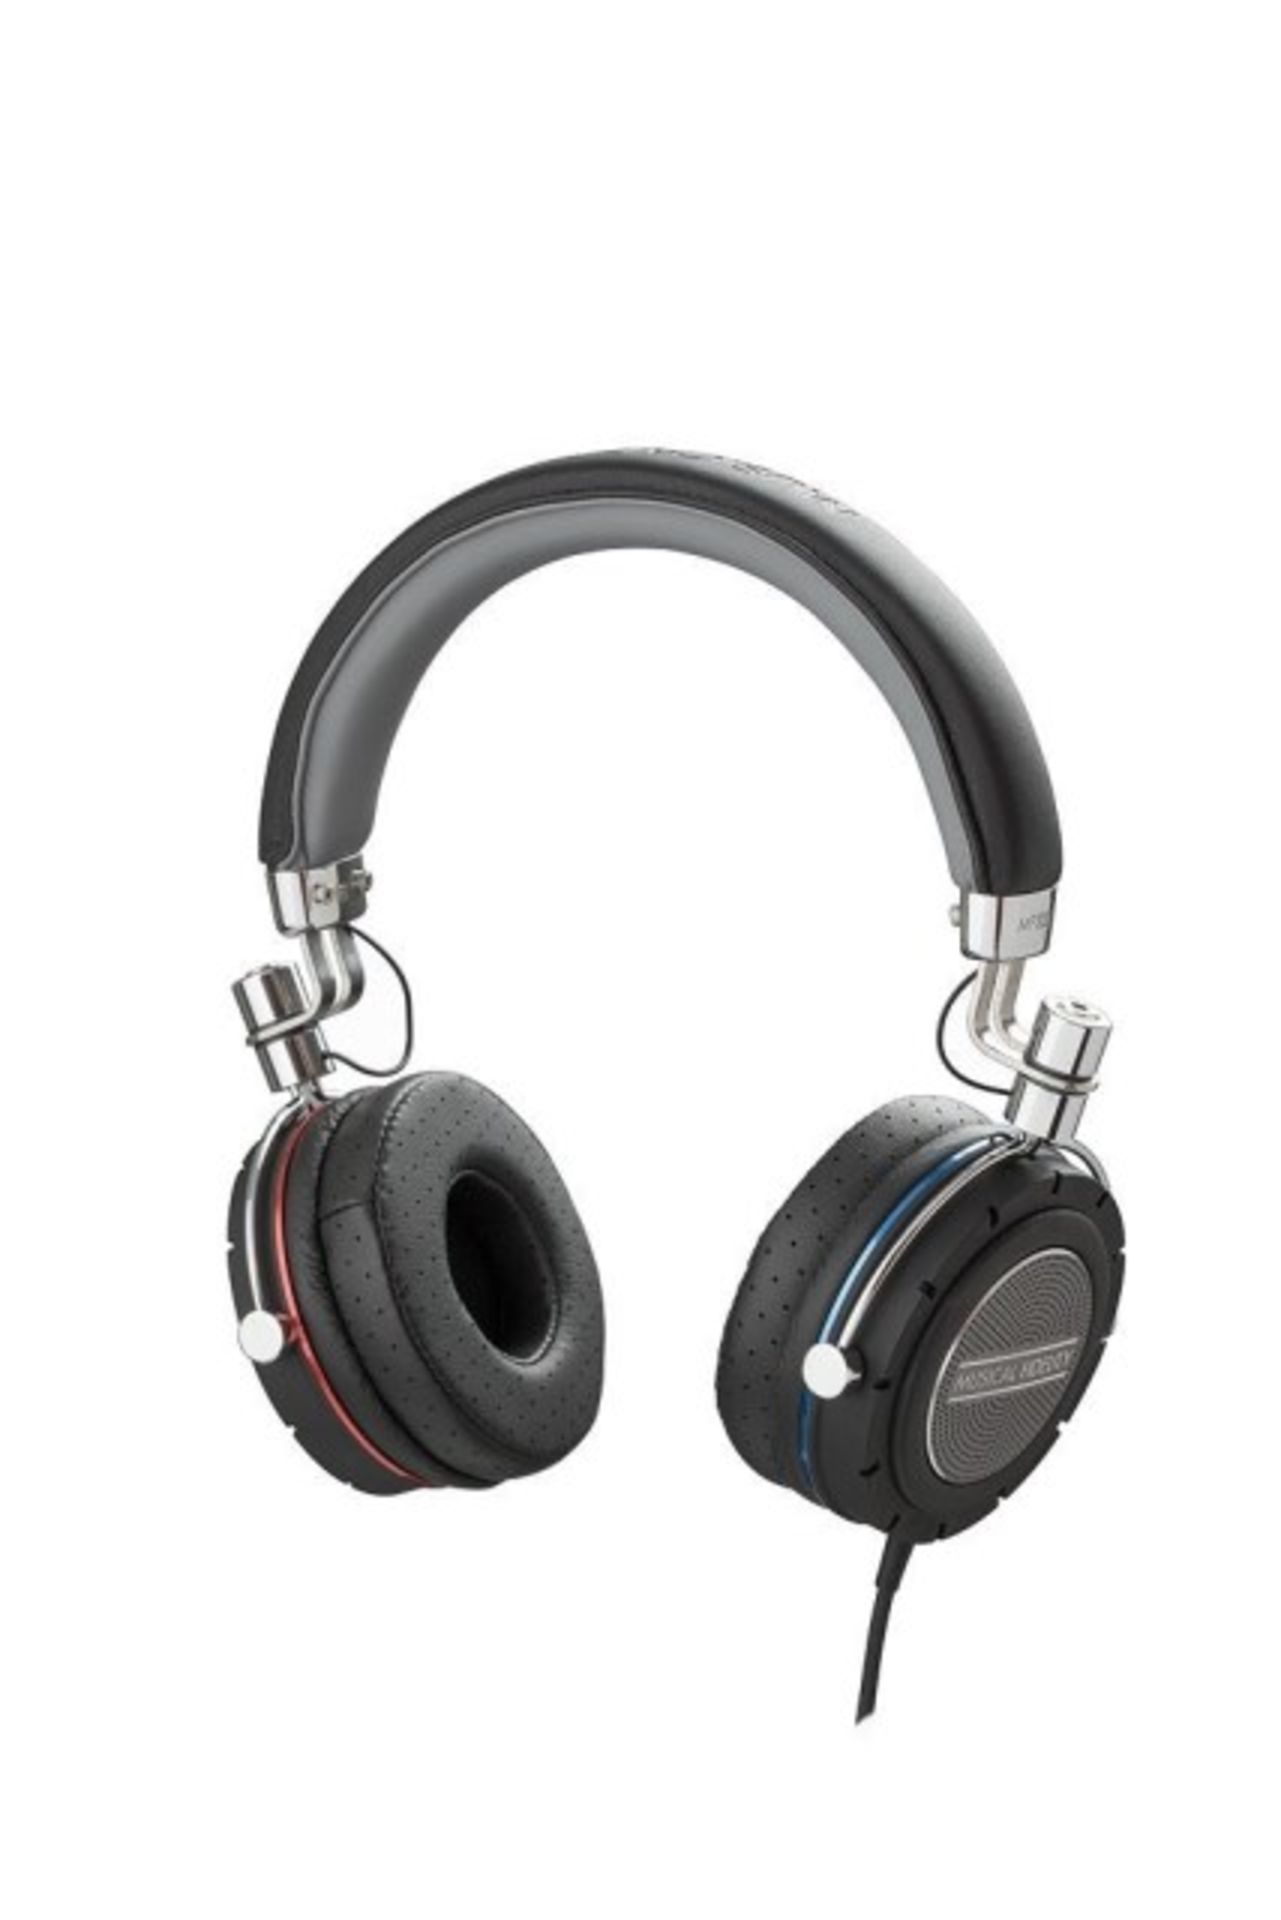 V *TRADE QTY* Brand New Musical Fidelity MF-200 Headphones (Brand New & Sealed) RRP £249 X 8 YOUR